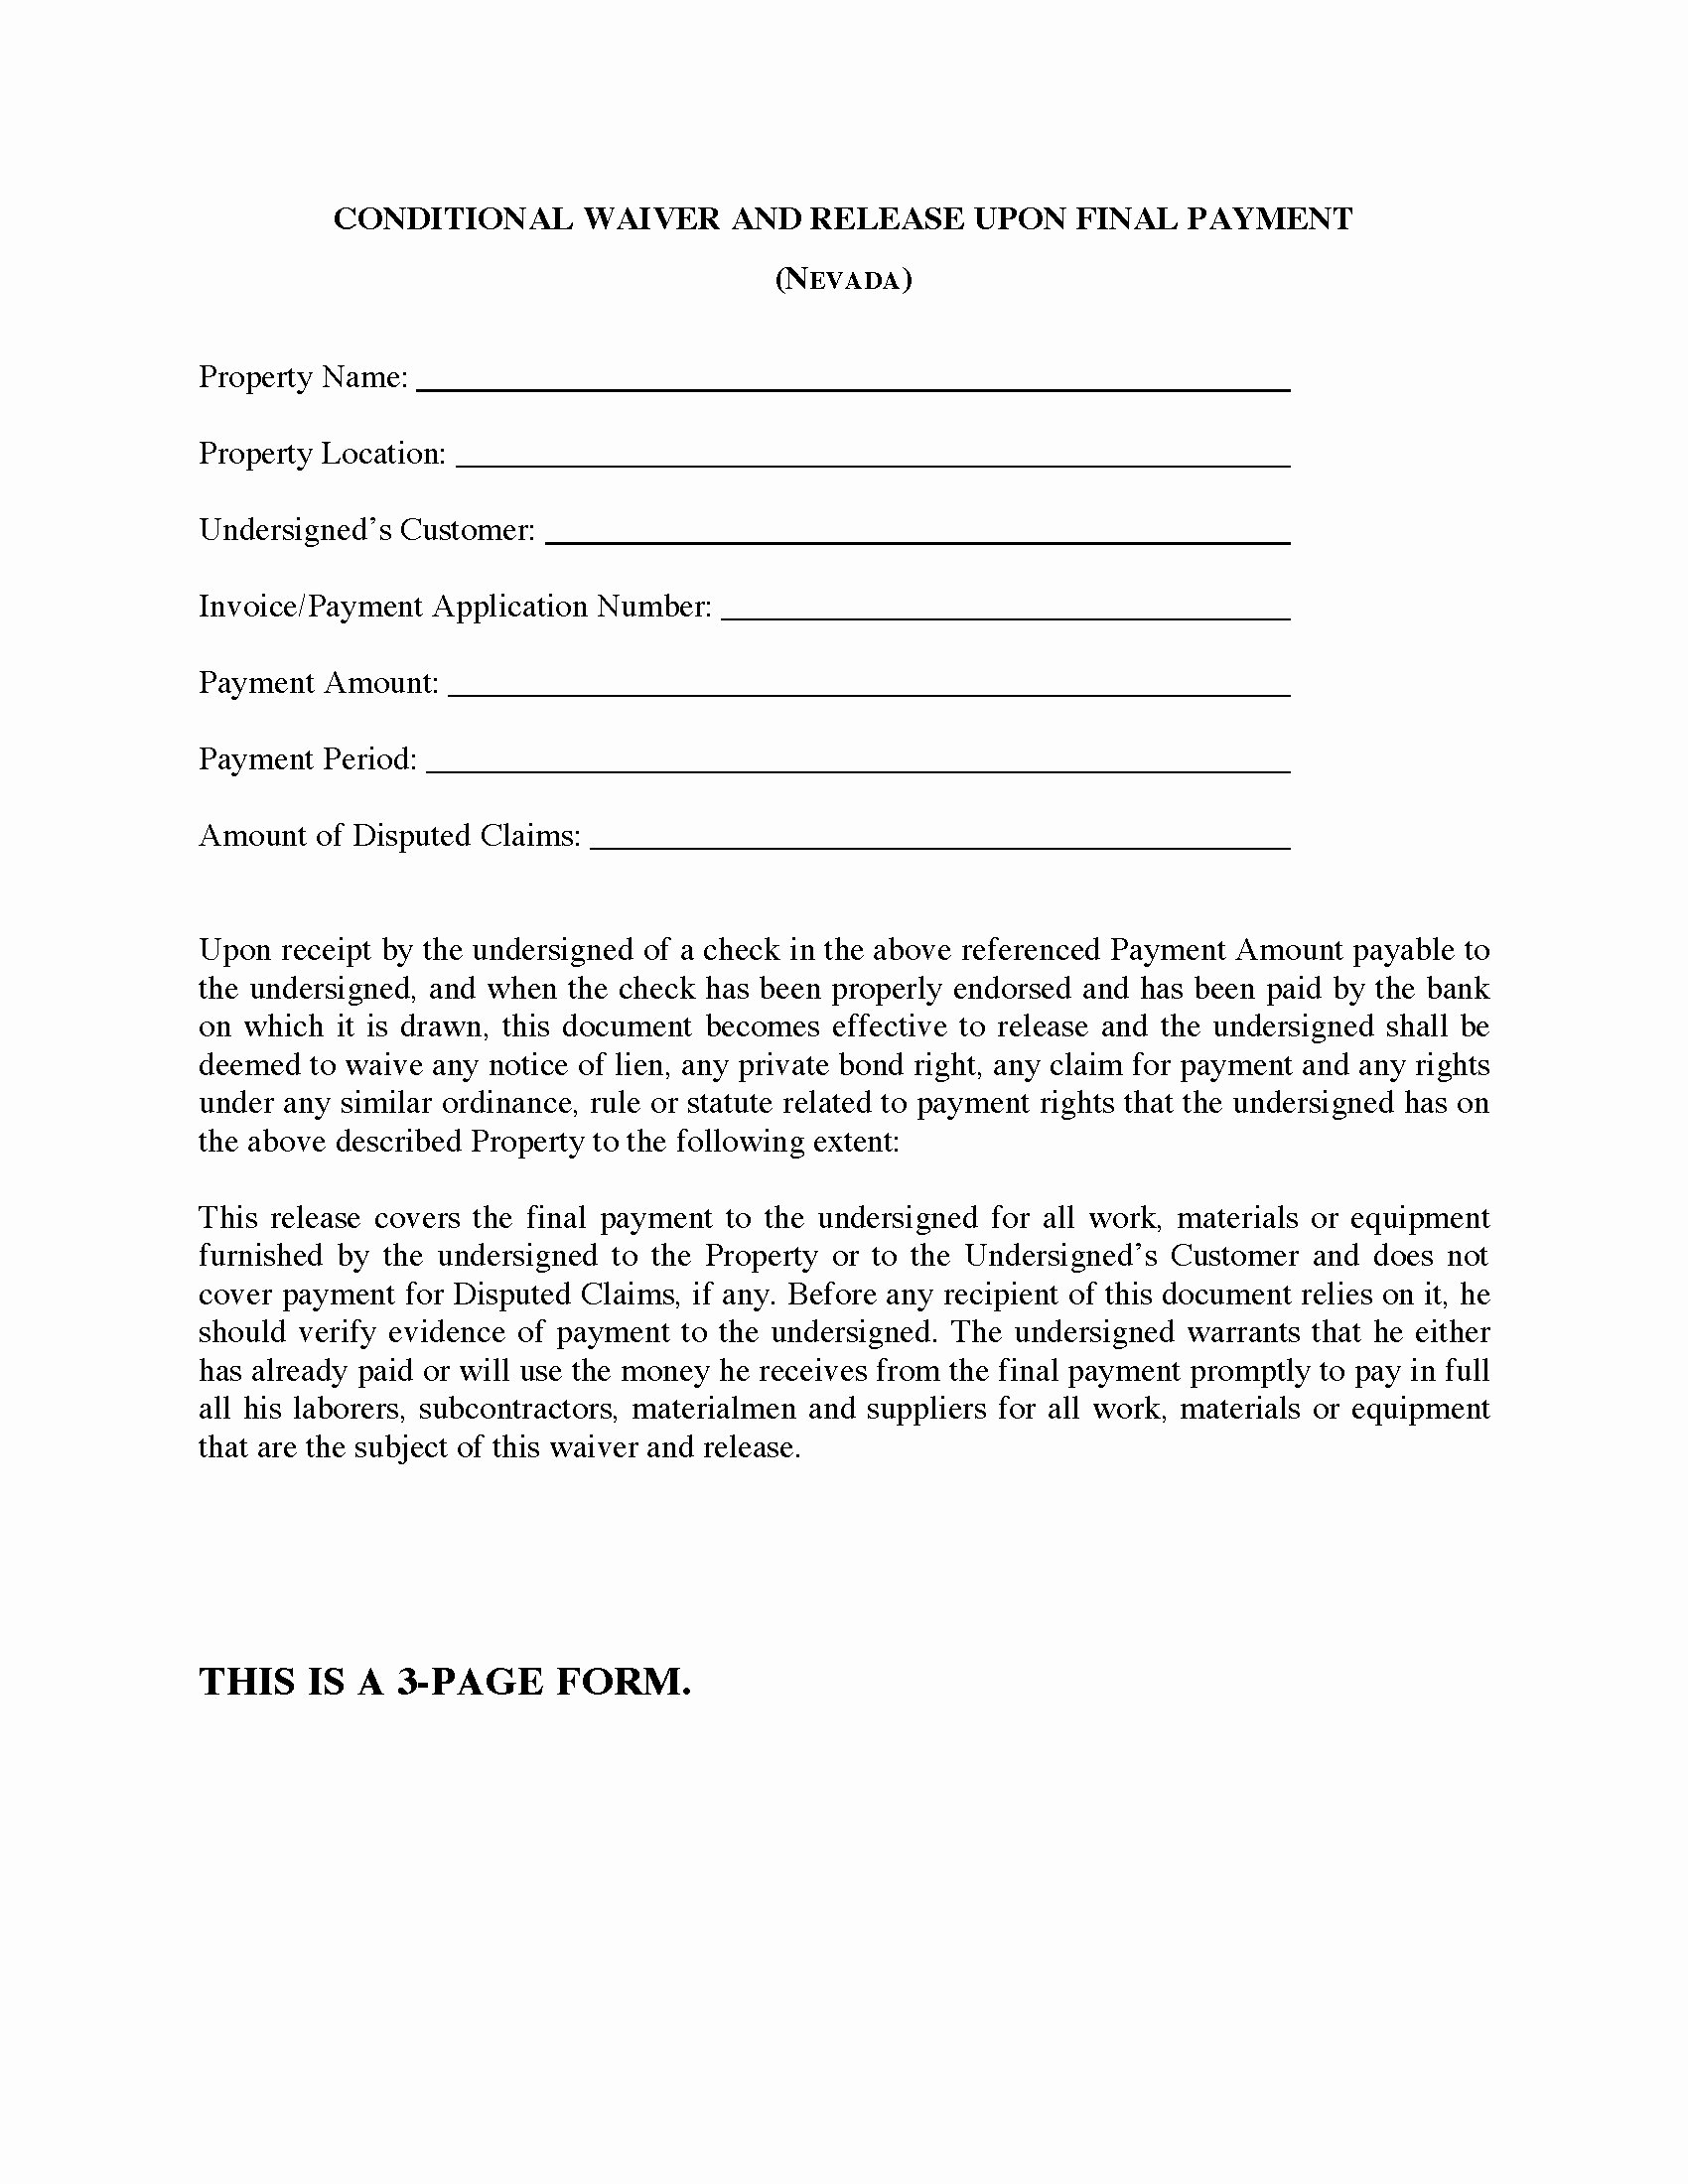 Final Lien Waiver Template New Nevada Conditional Waiver and Release Of Lien Upon Final